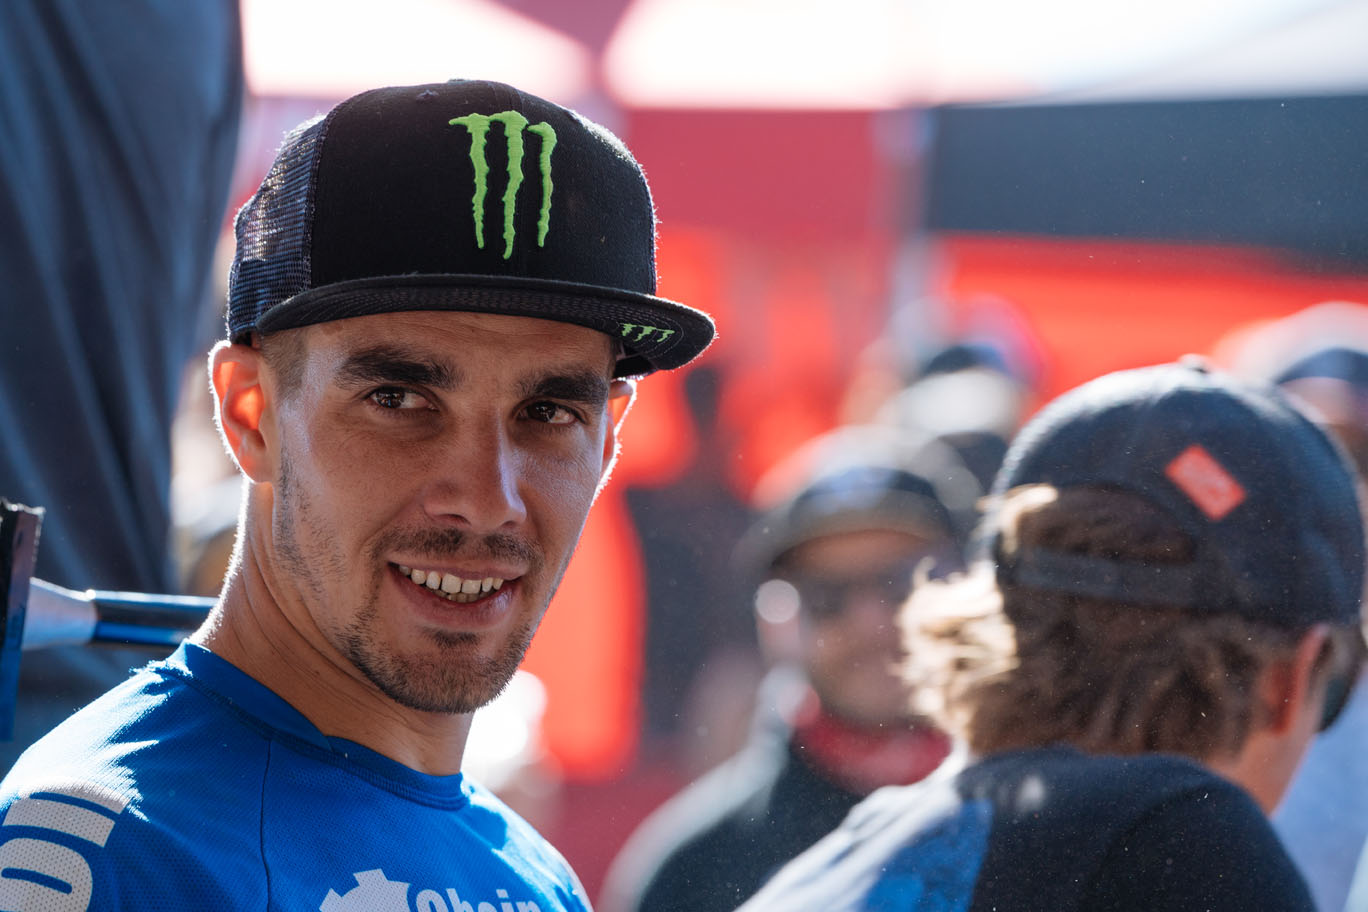 Monster Energy’s Sam Hill Dominates Opening Round of Enduro World Series In Chile